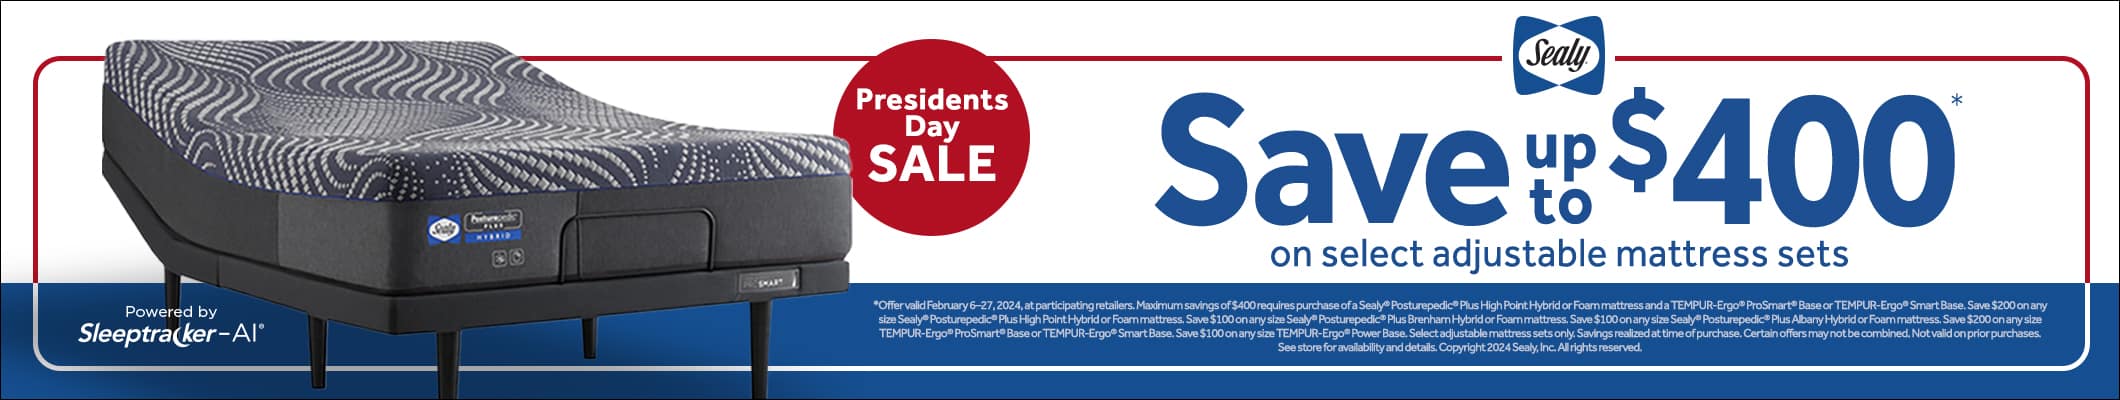 Sealy President's Day Sale